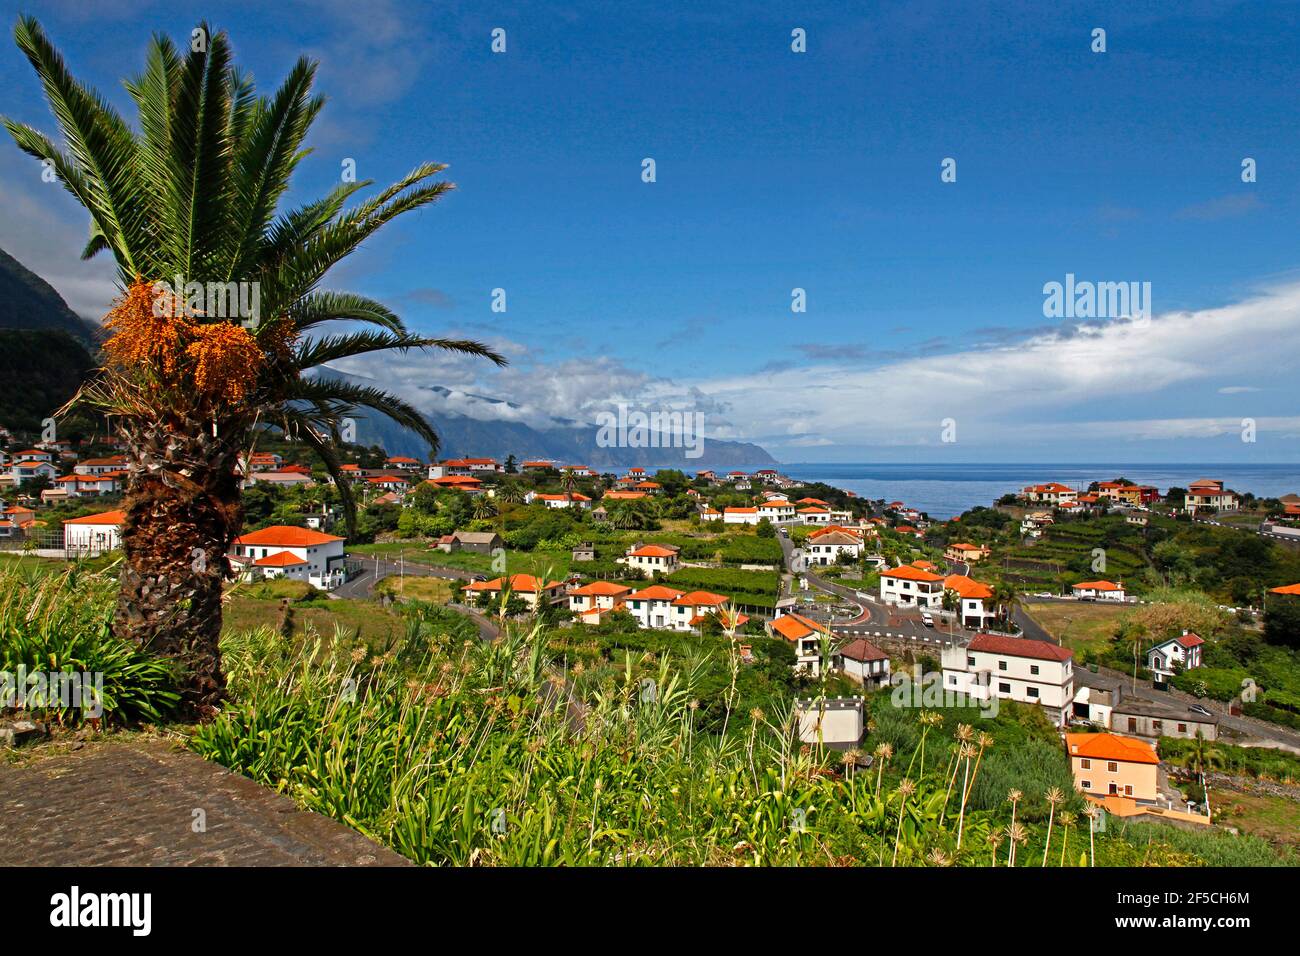 Geographie / Reisen, Portugal, Insel Madeira, Wallfahrtsort Ponta Delgada, Additional-Rights-Clearance-Info-not-available Stockfoto